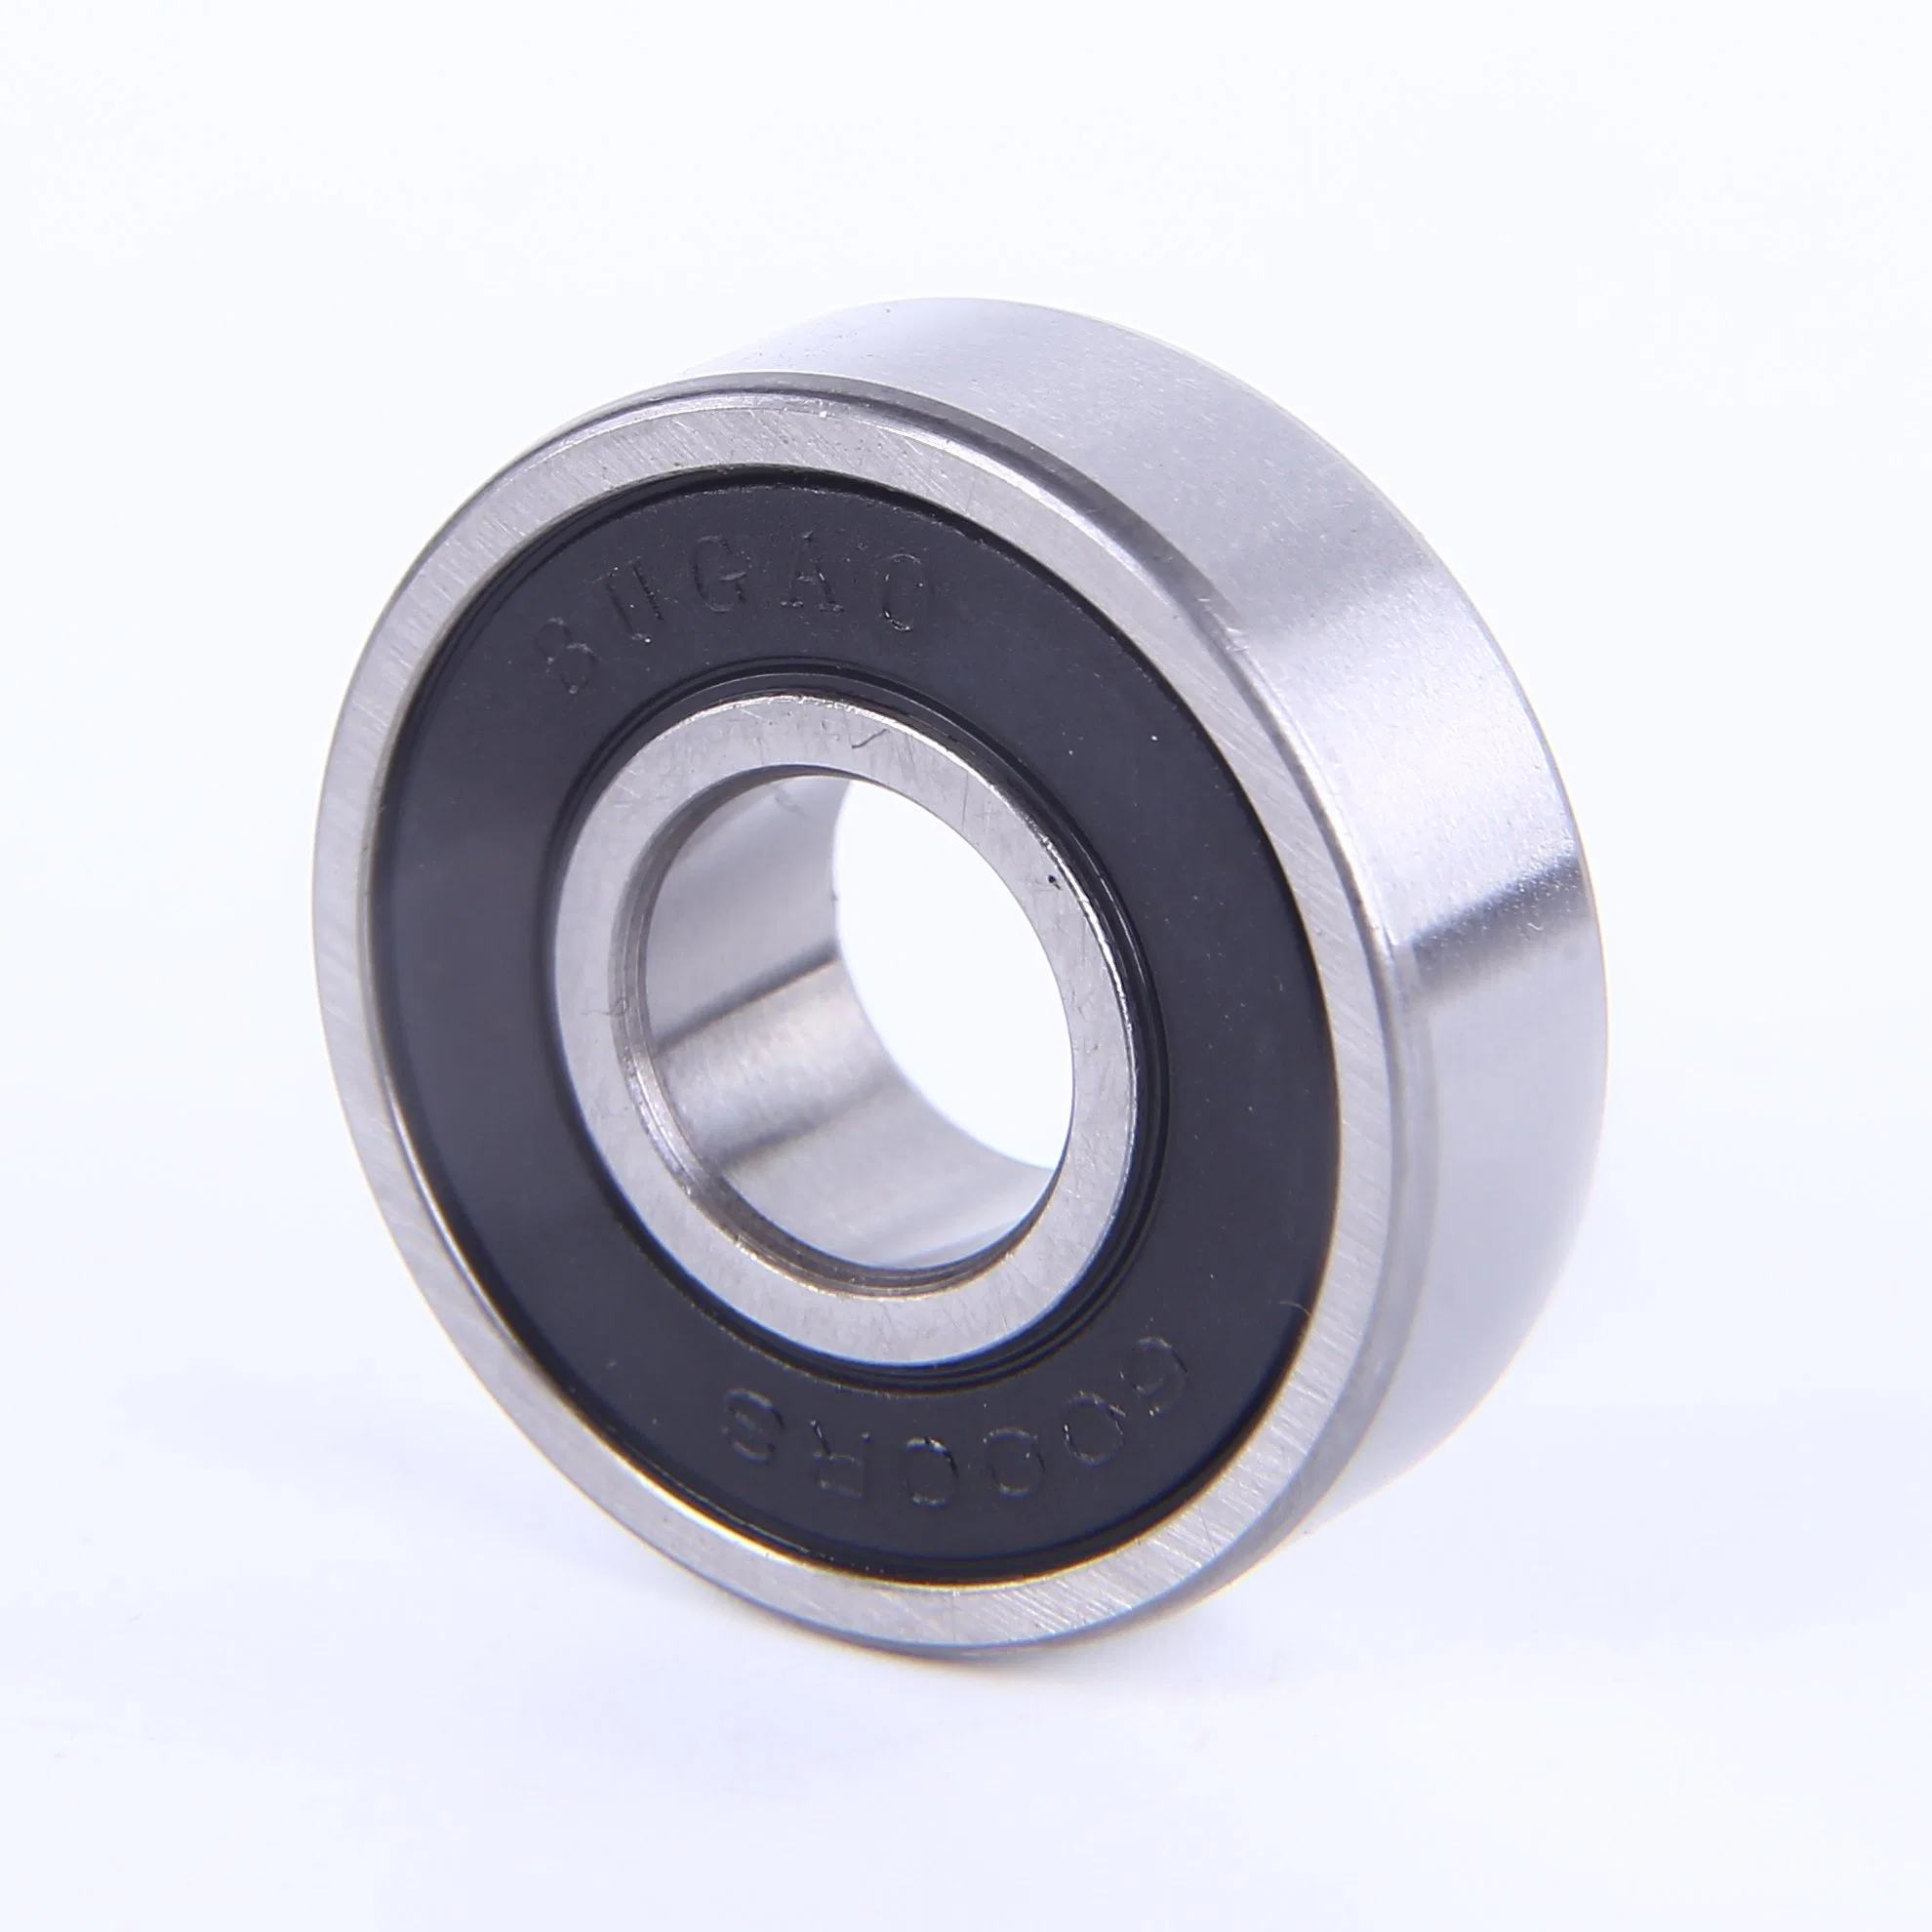 Motor/Engine Deep Groove Ball Bearing for Indutrial/No Noise Householding